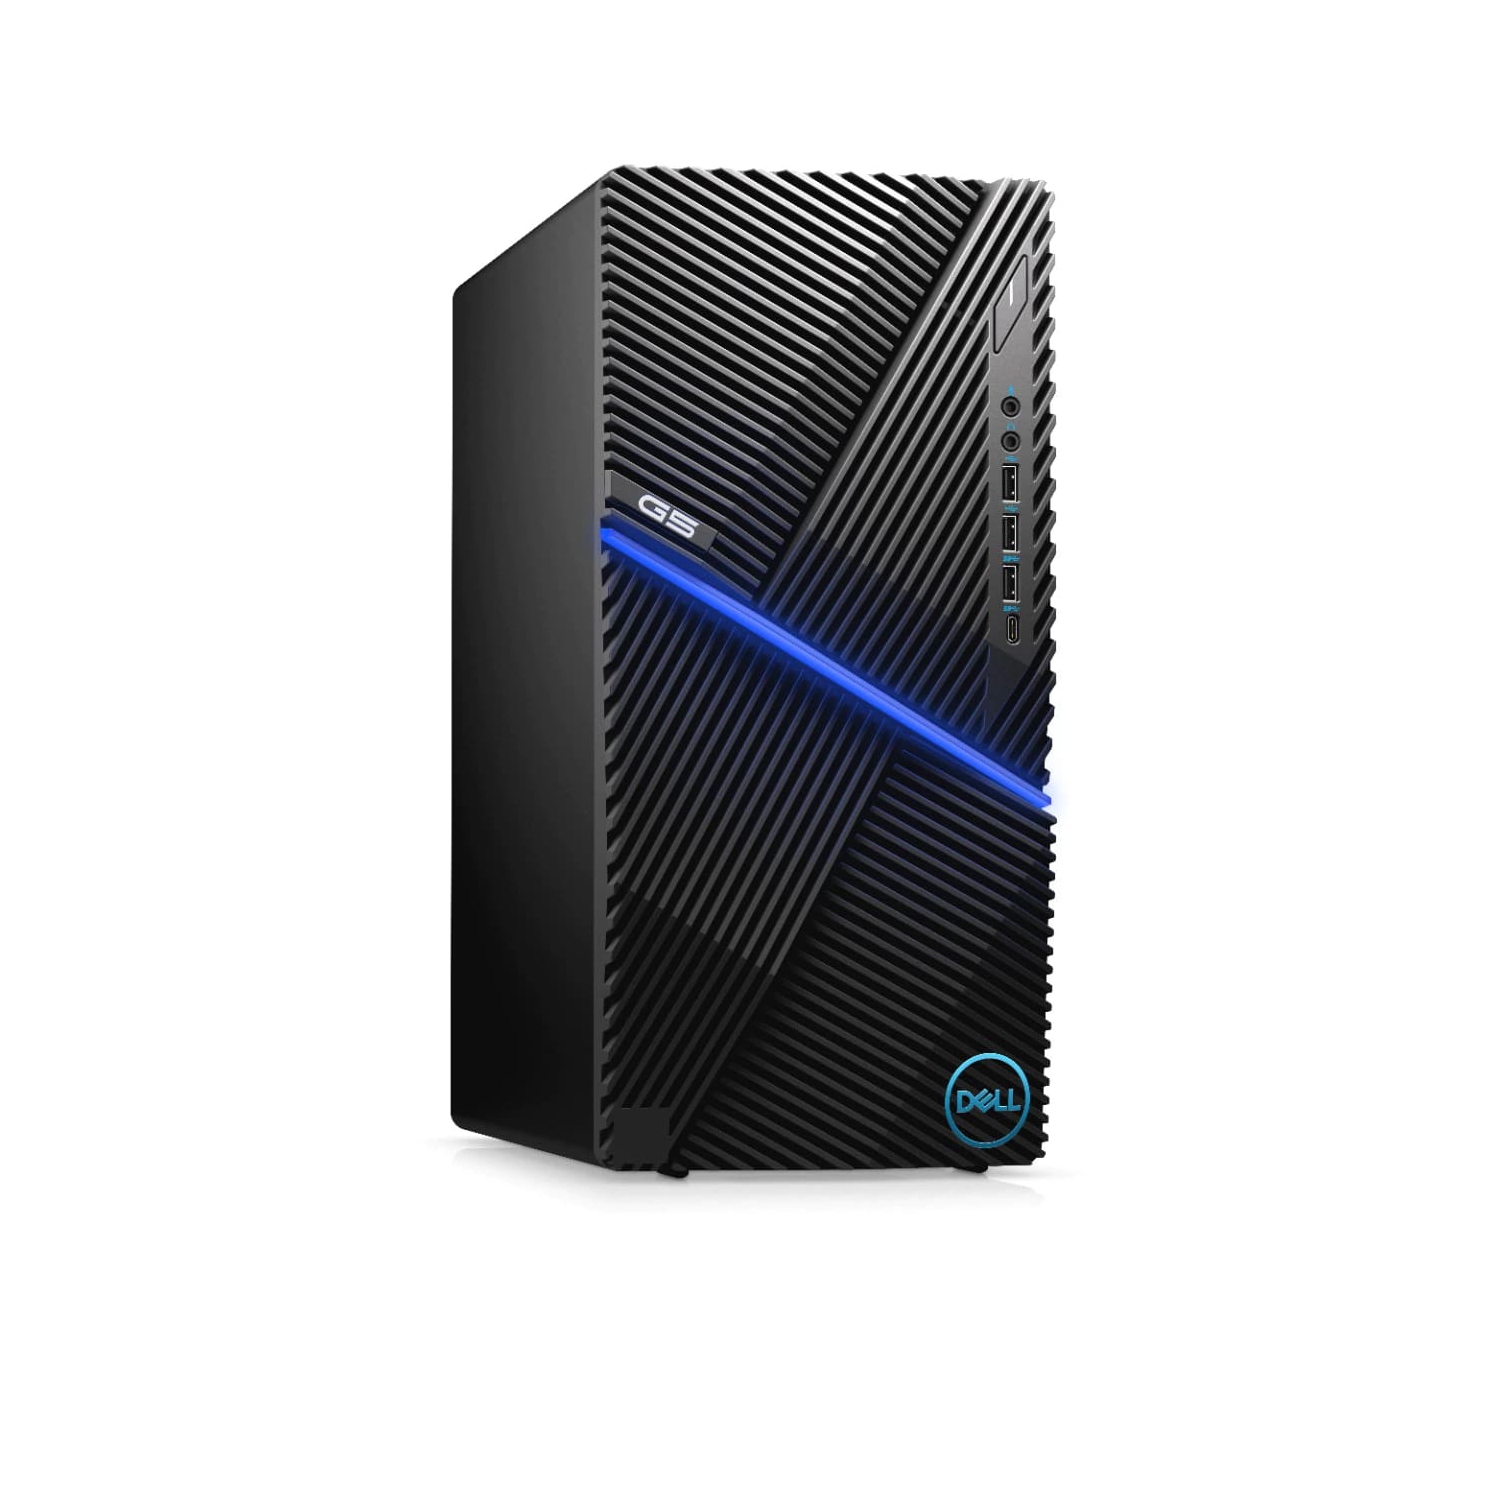 Refurbished (Excellent) - Dell G5 5000 Gaming Desktop (2020), Core i7 - 1TB HDD + 512GB SSD - 16GB RAM - RTX 3070, 8 Cores @ 5.1 GHz - 10th Gen CPU Certified Refurbished